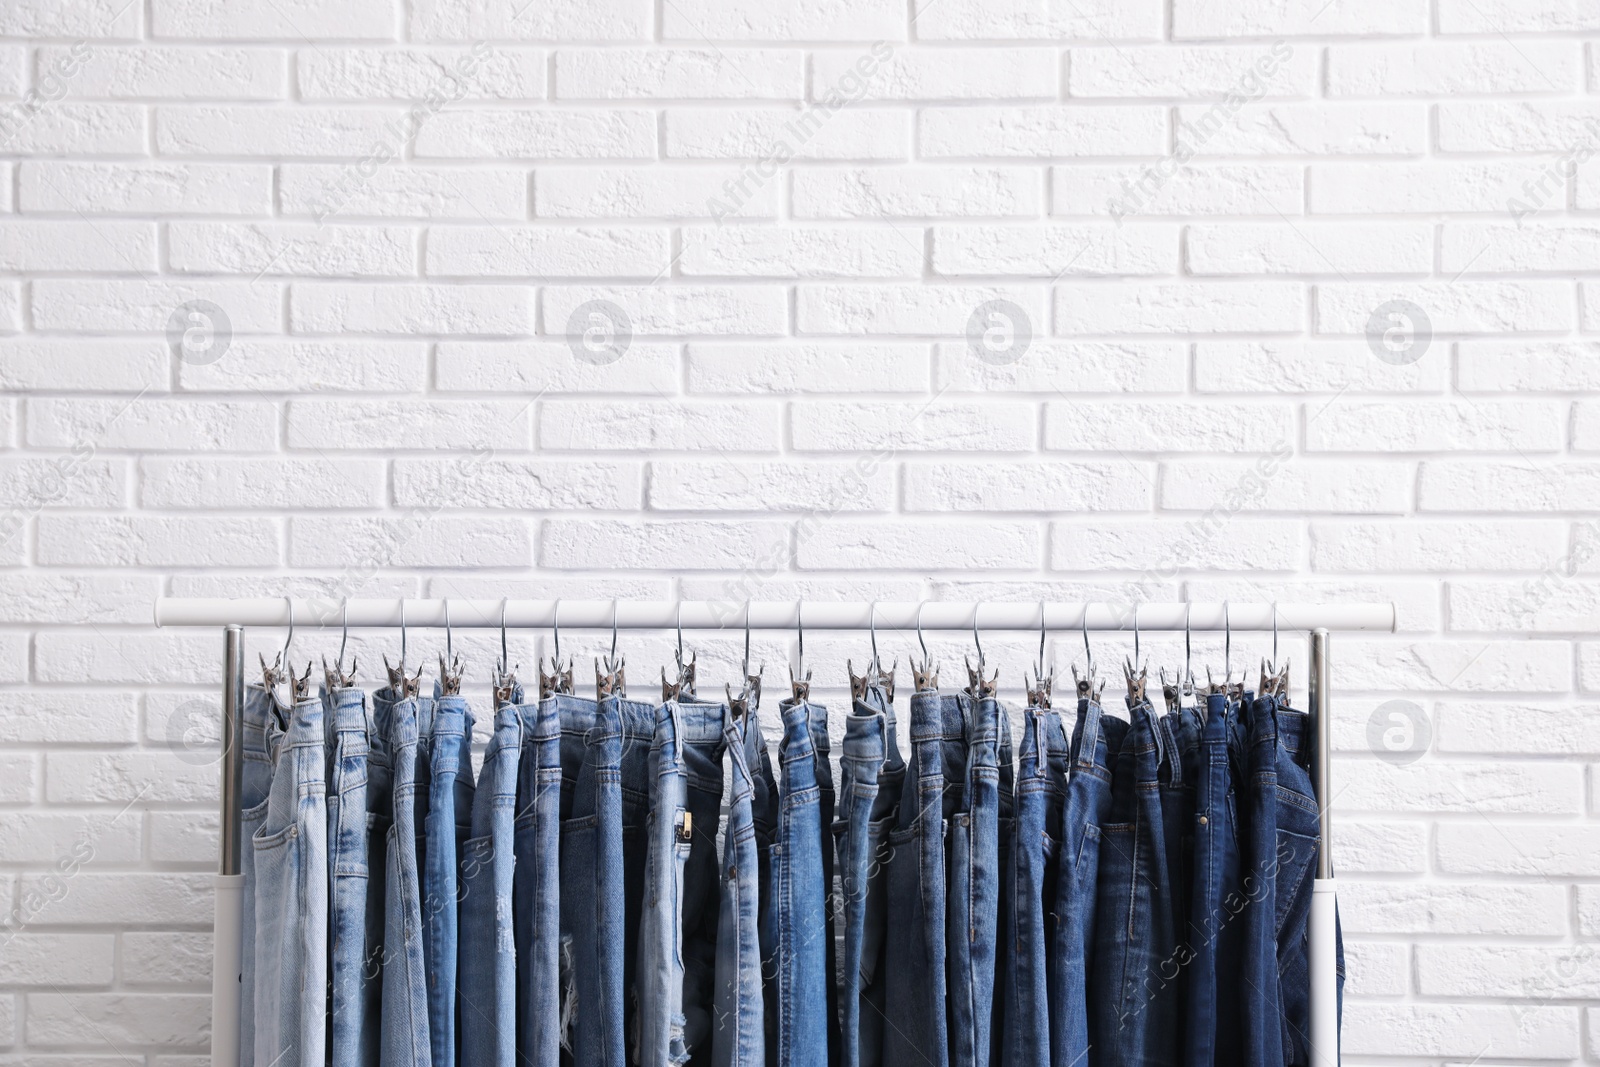 Photo of Rack with stylish jeans near brick wall. Space for text